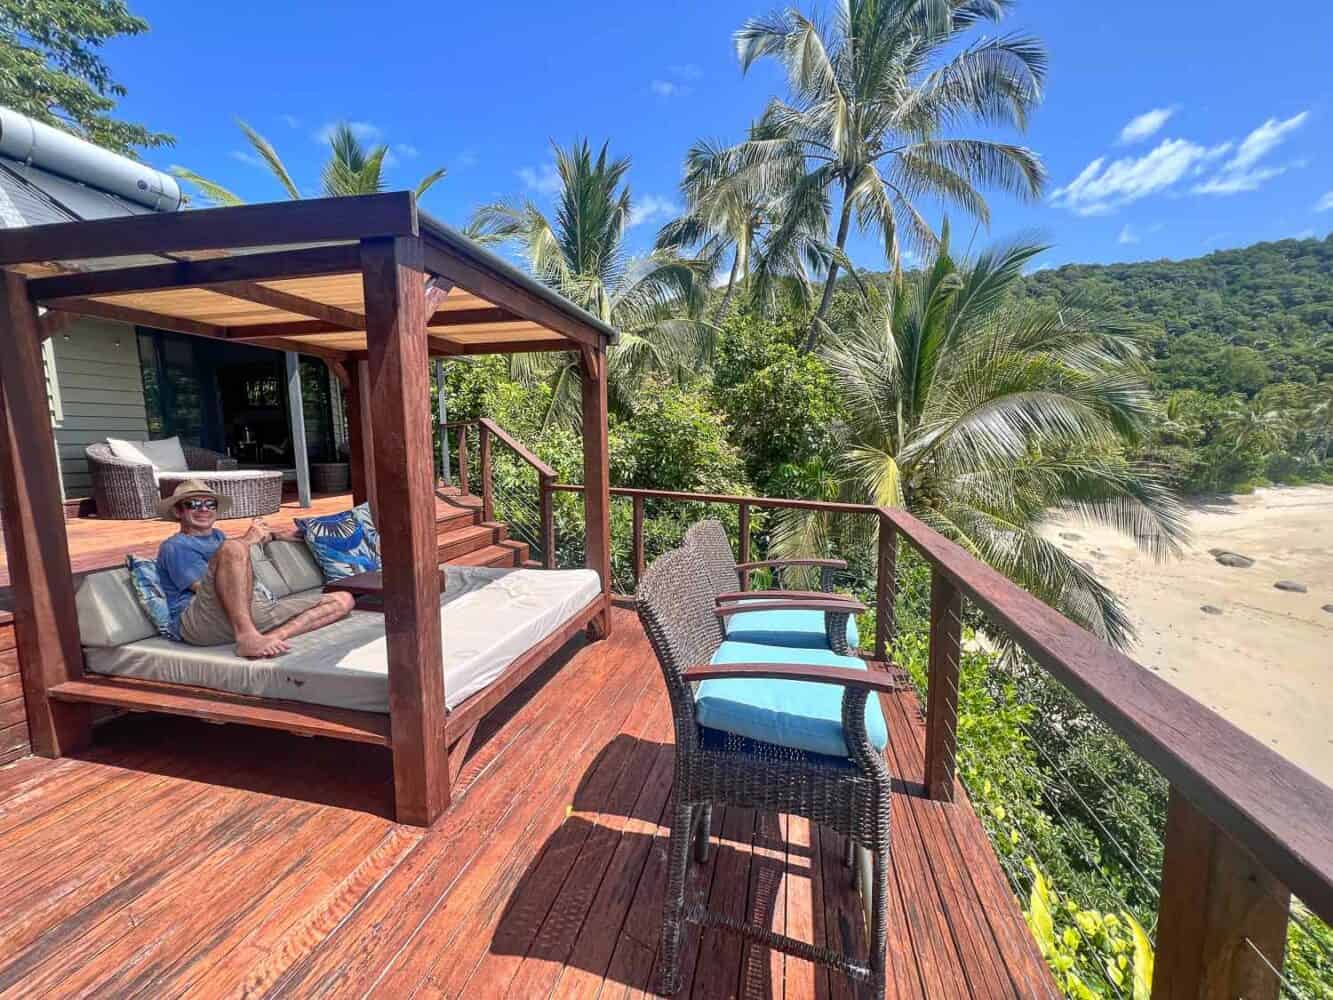 Simon relaxing in the day bed on the deck, Treehouse Villa, Bedarra Island Resort, Queensland, Australia